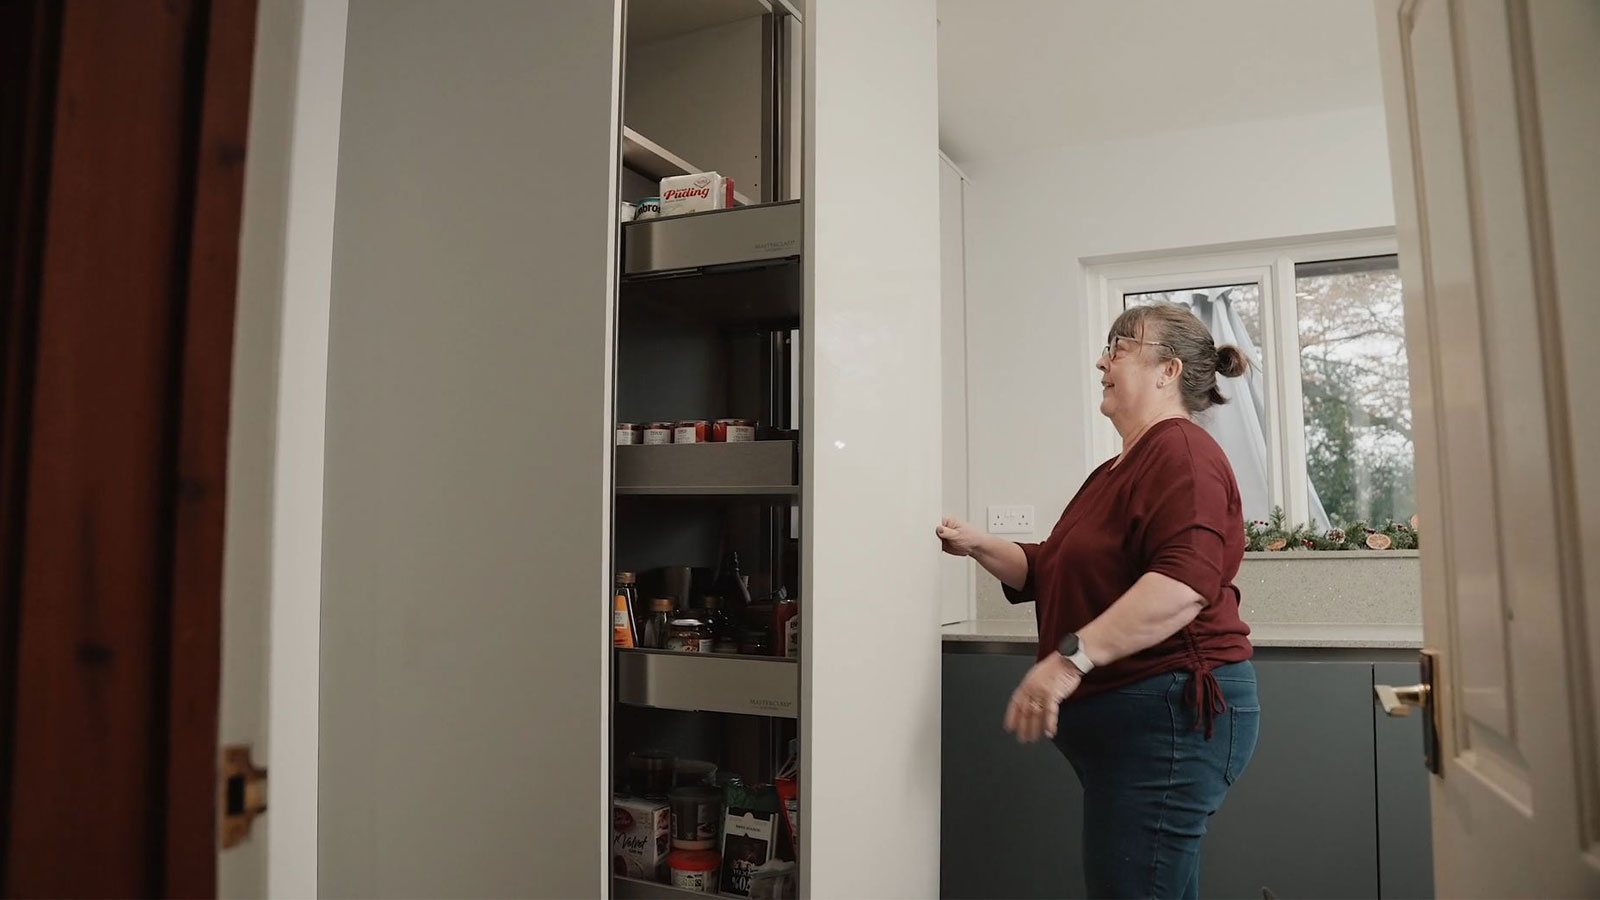 Gail accessing a corner larder unit which offers pull-out corner storage